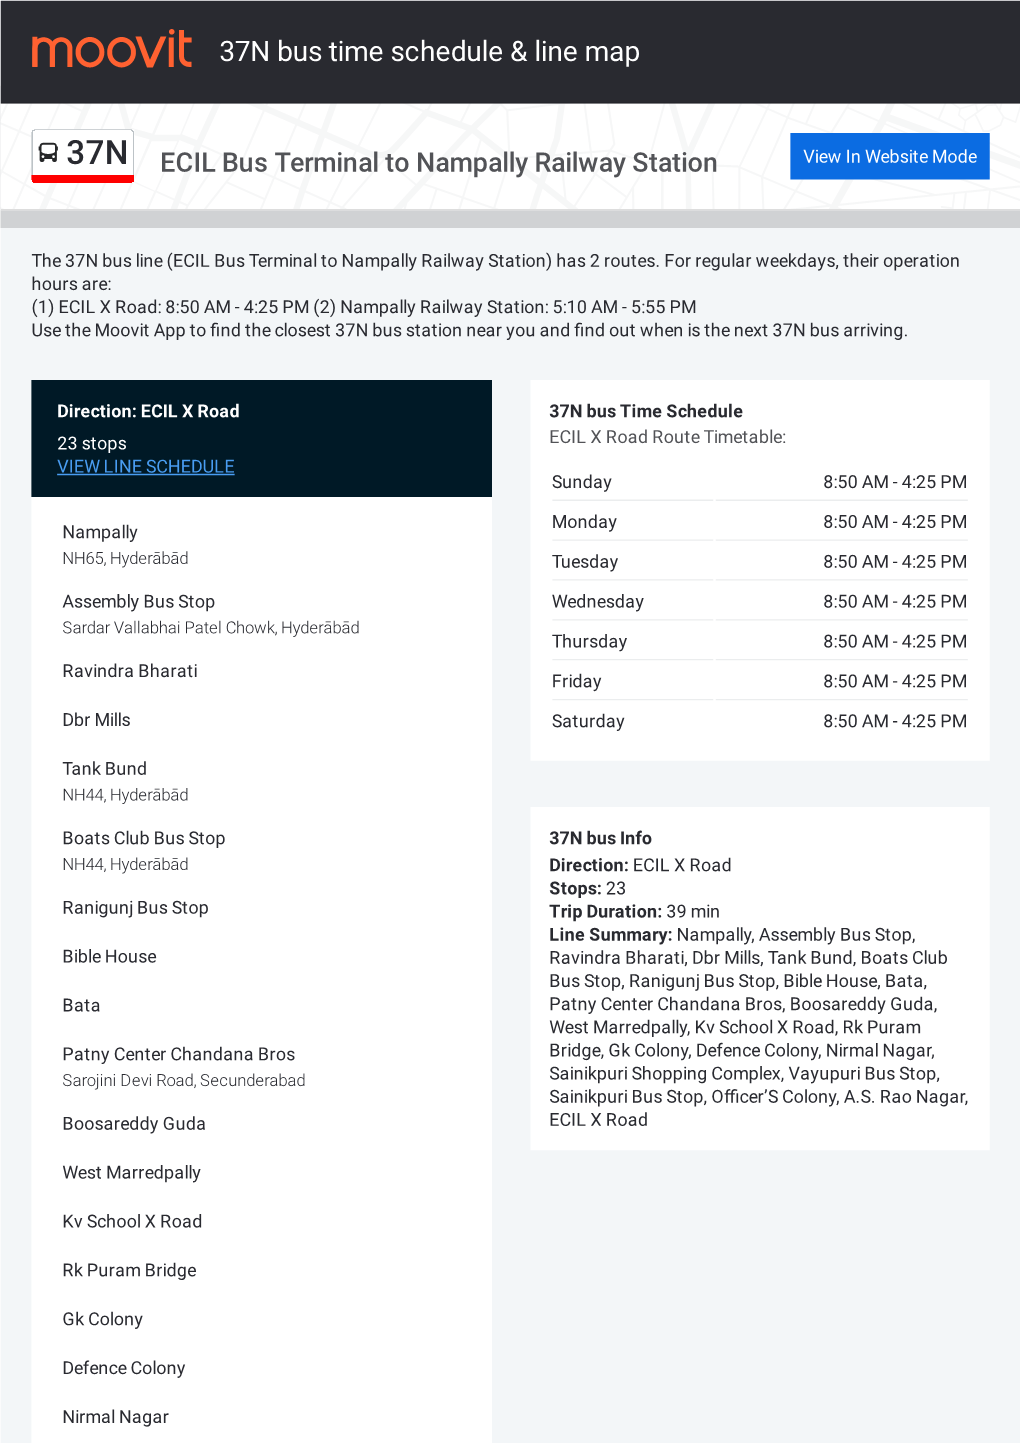 37N Bus Time Schedule & Line Route